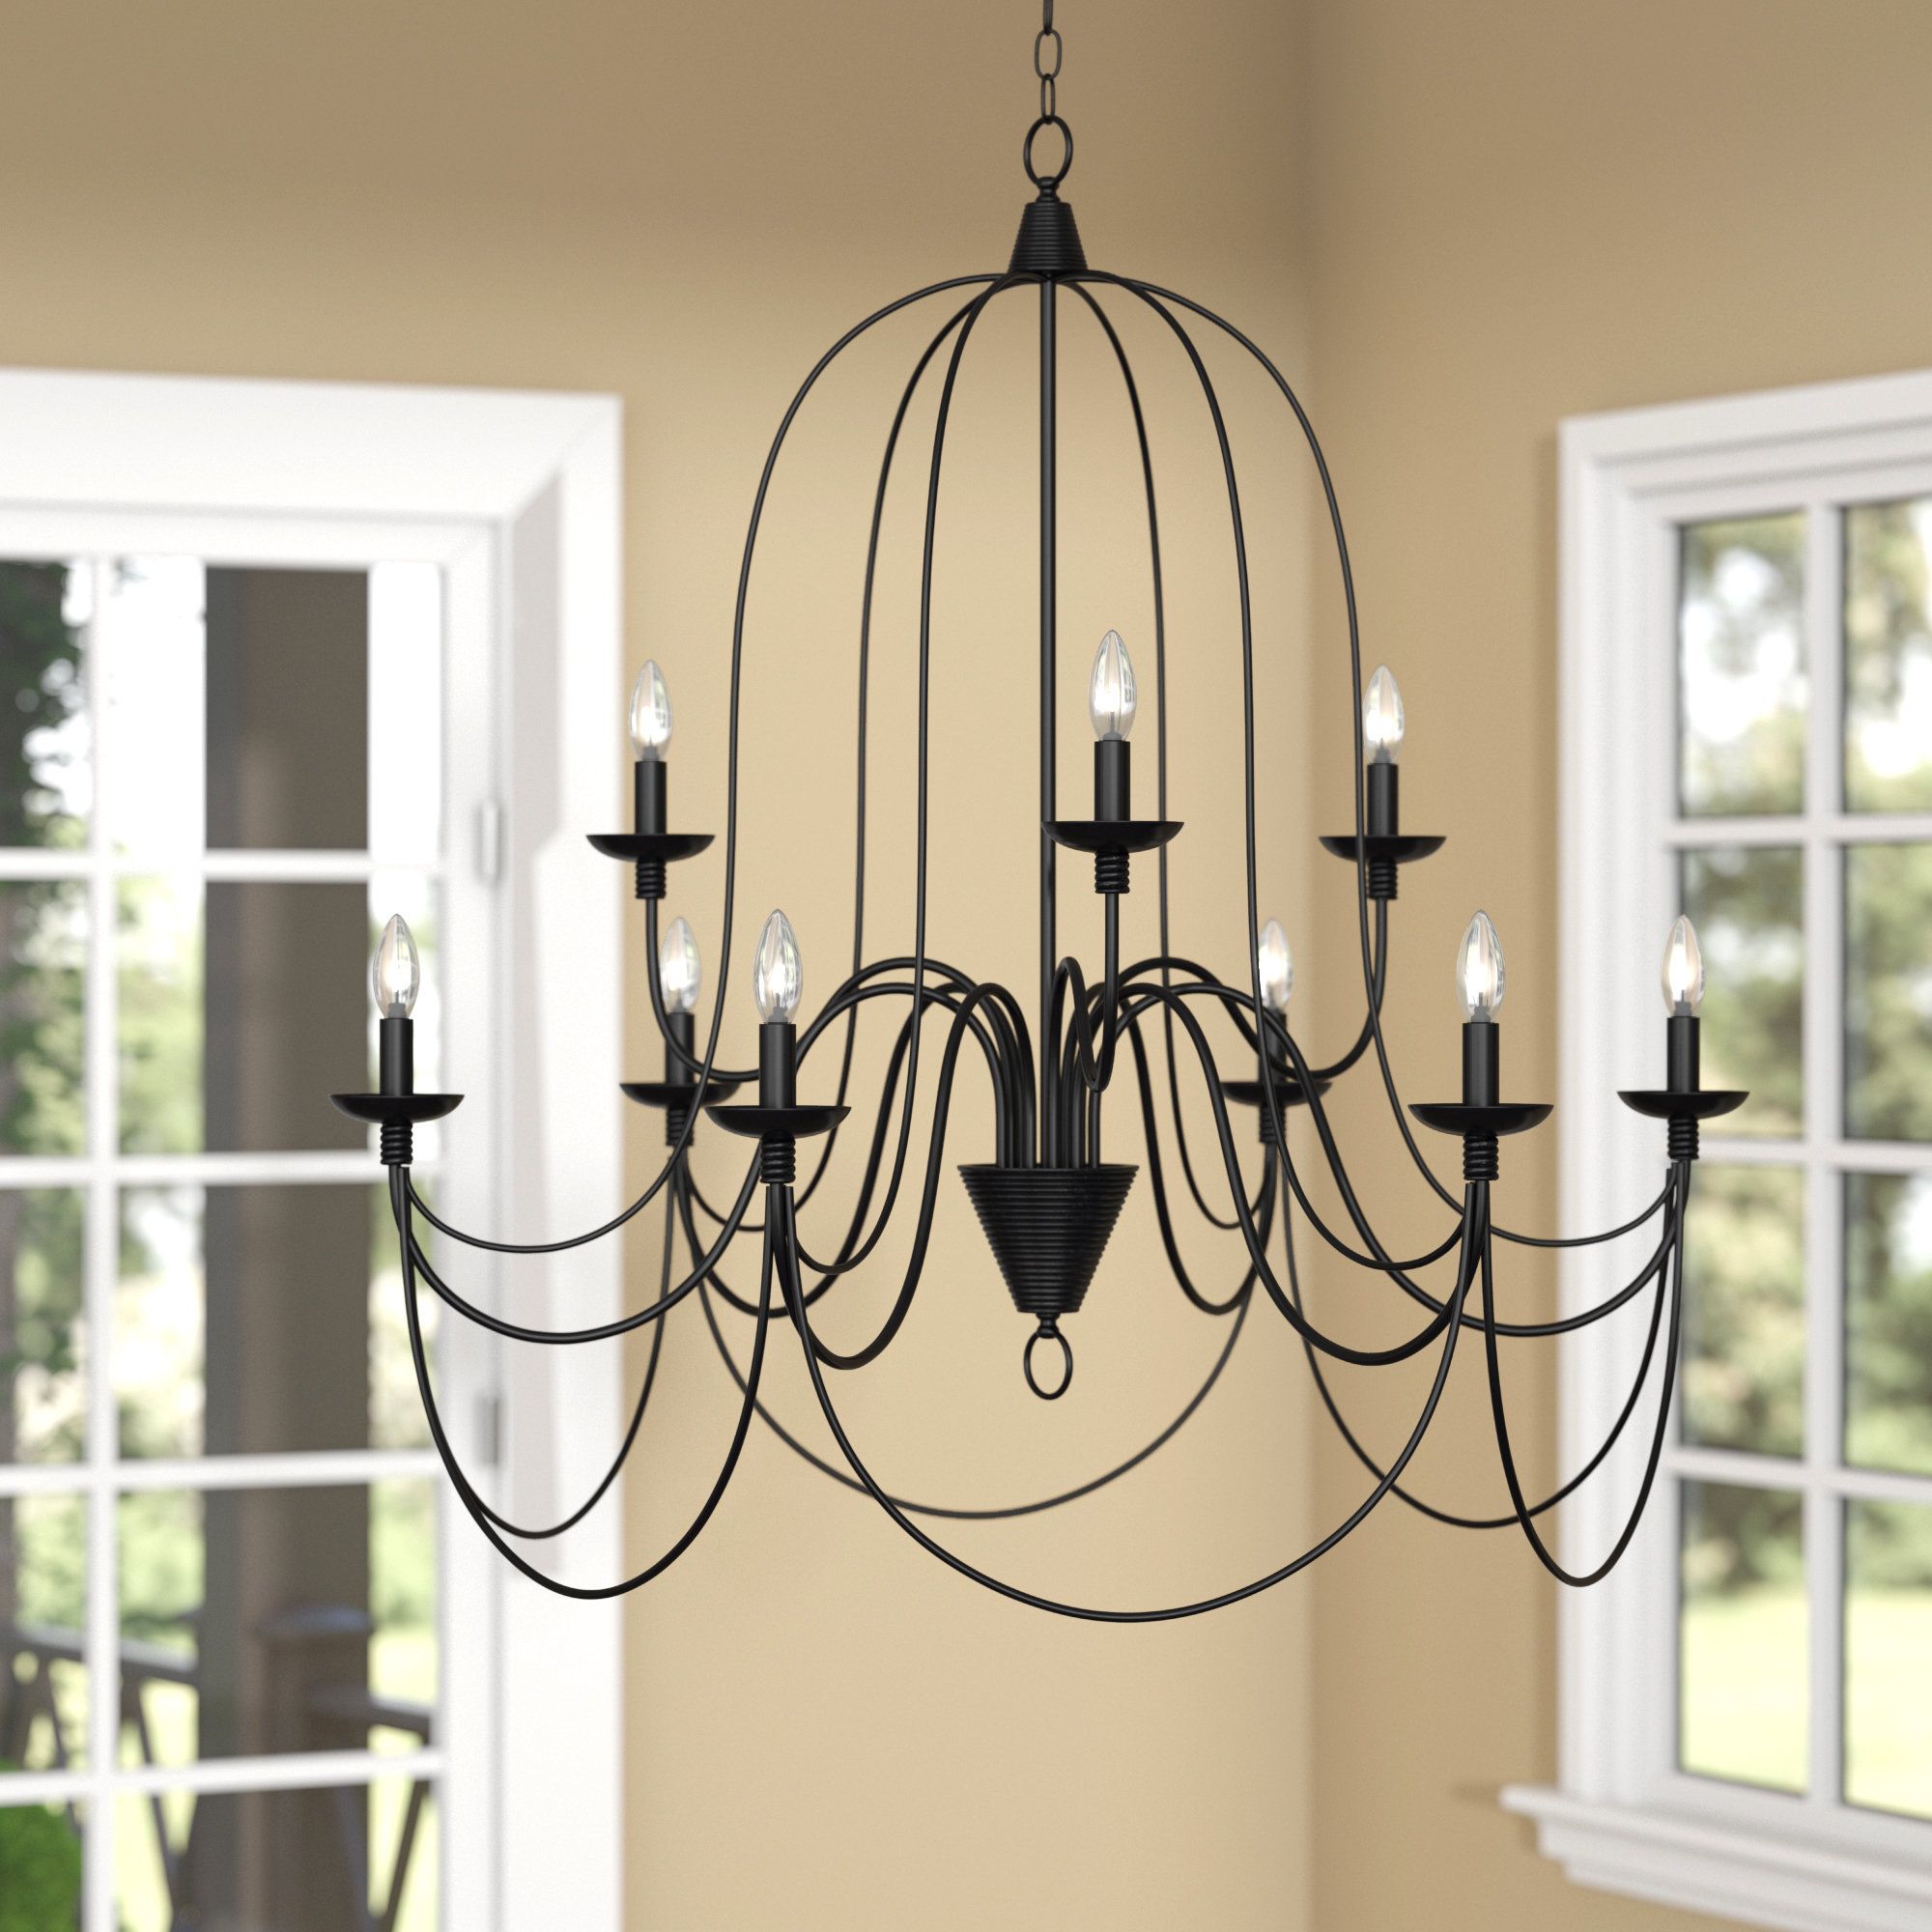 Three Posts Watford 9 Light Candle Style Chandelier Intended For Camilla 9 Light Candle Style Chandeliers (View 21 of 30)